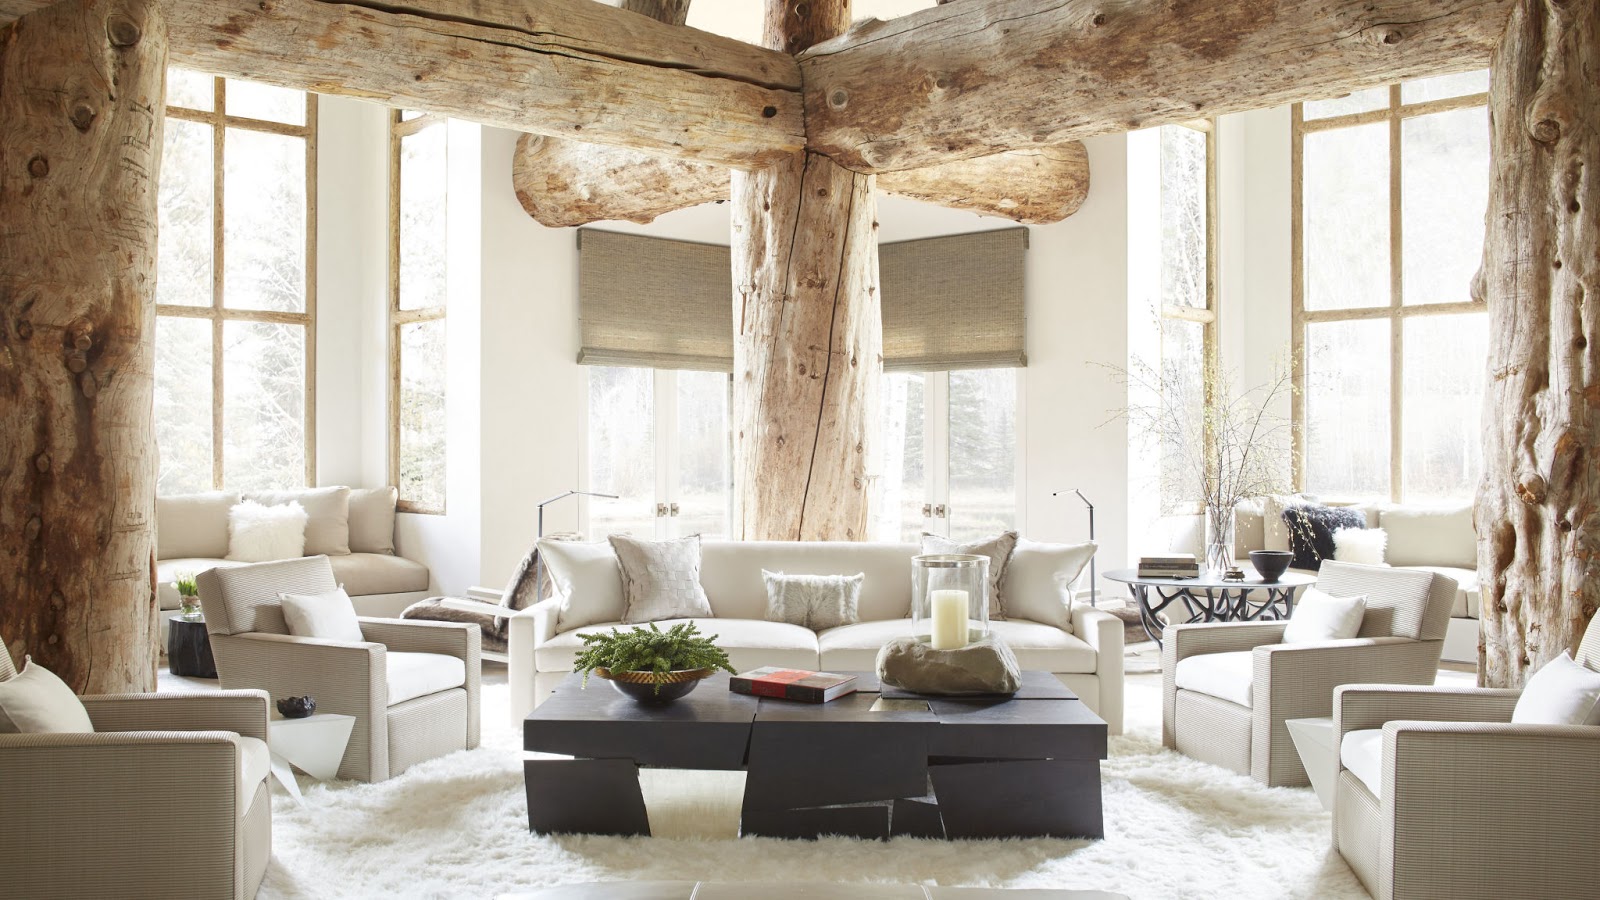 Dragonfly Designs Contemporary Rustic Style In Aspen With